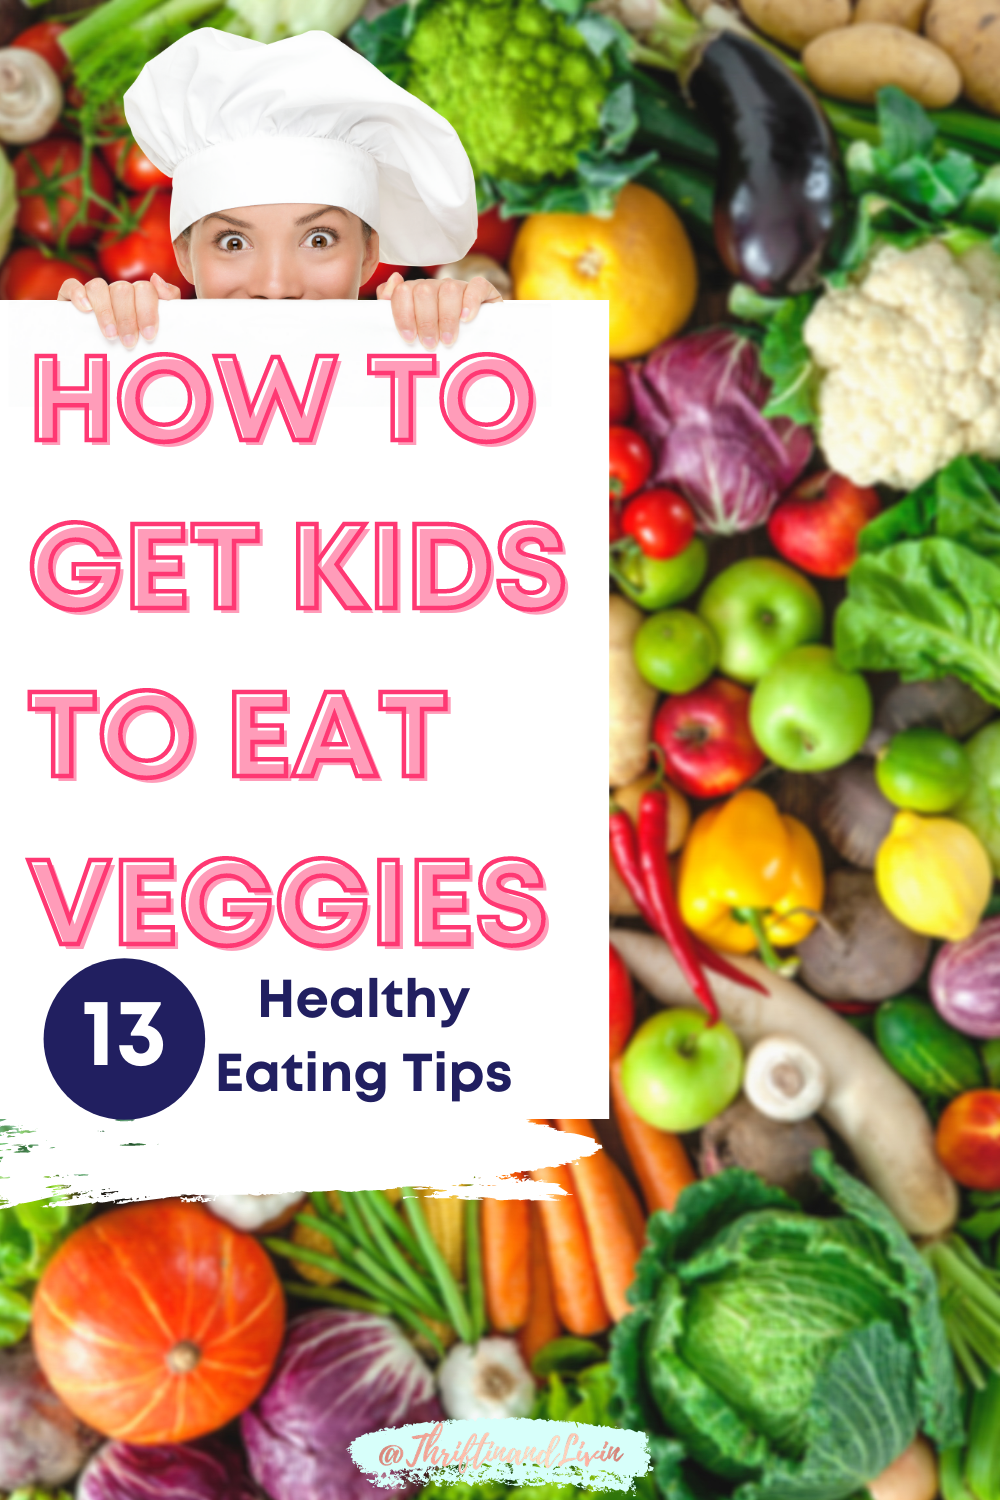 Colorful pinterest image with a pink headline in all caps that says "how to get kids to eat veggies," and a navy subheading that says 13 healthy eating tips. The background of the image is a variety of fresh vegetables.